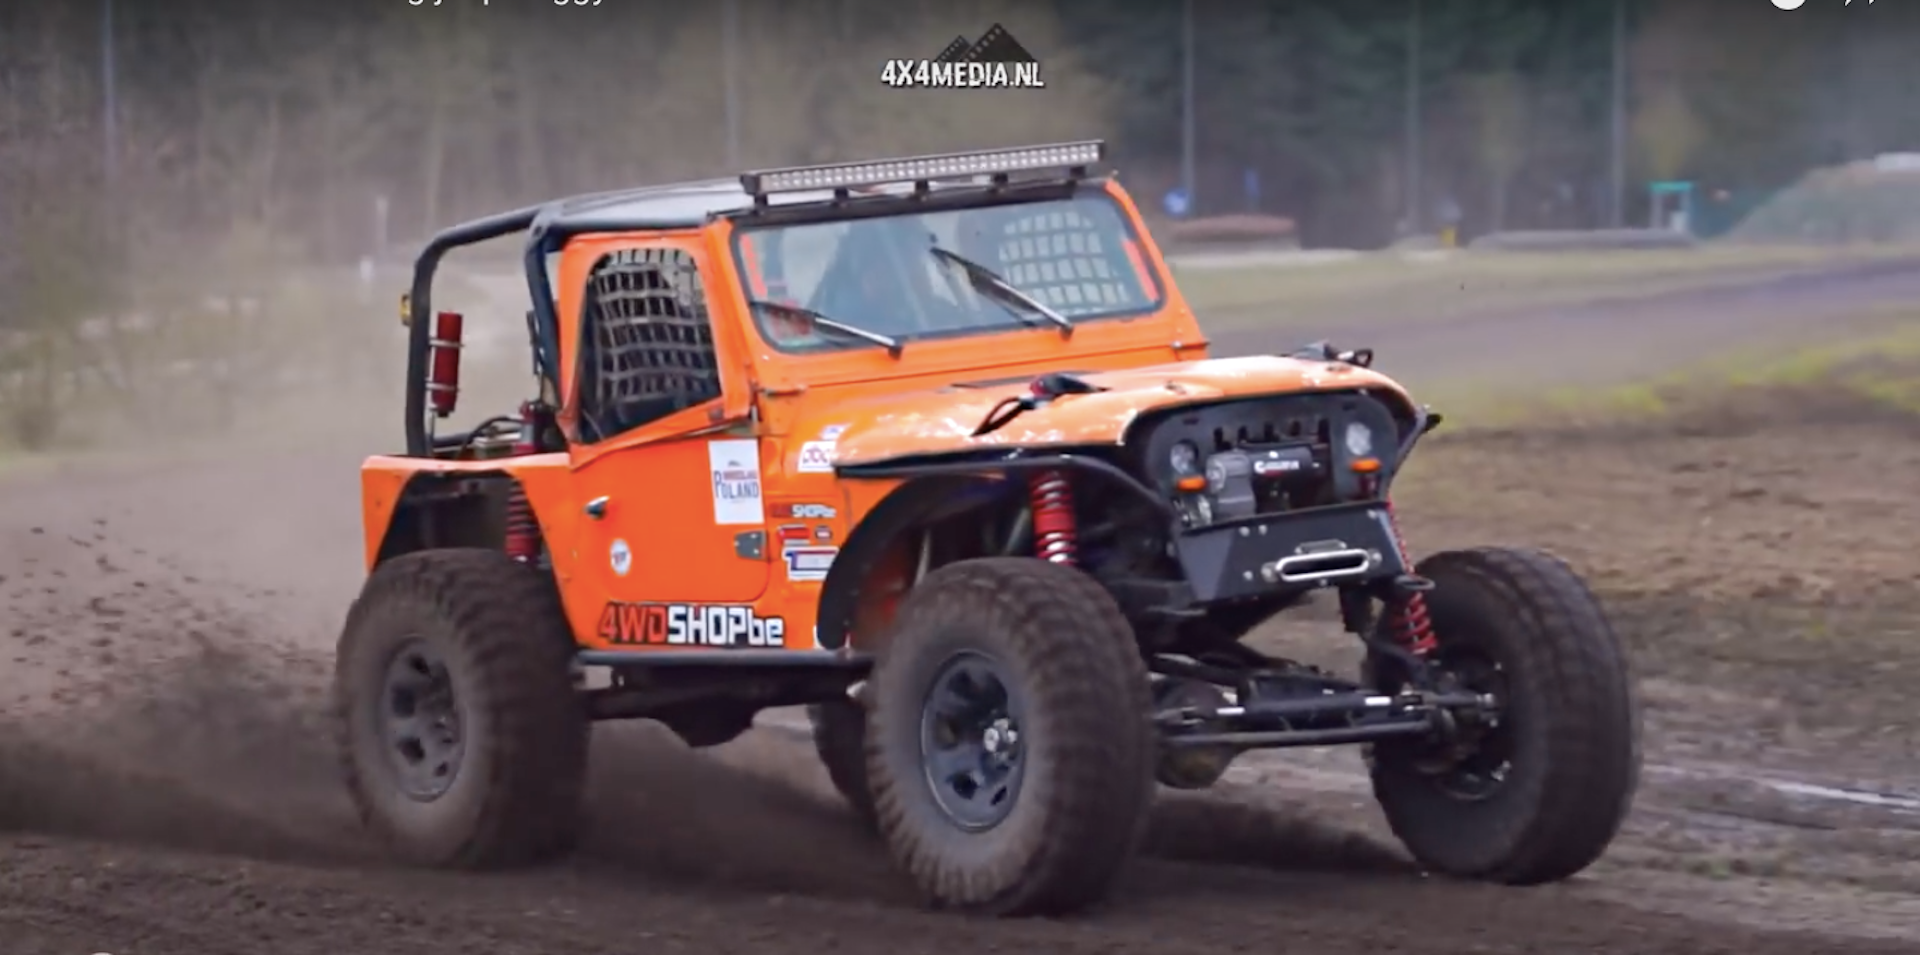 Watch This Mercedes-Benz-Swapped, 600-HP ‘Jeep’ Off-Roader Tear up the Track